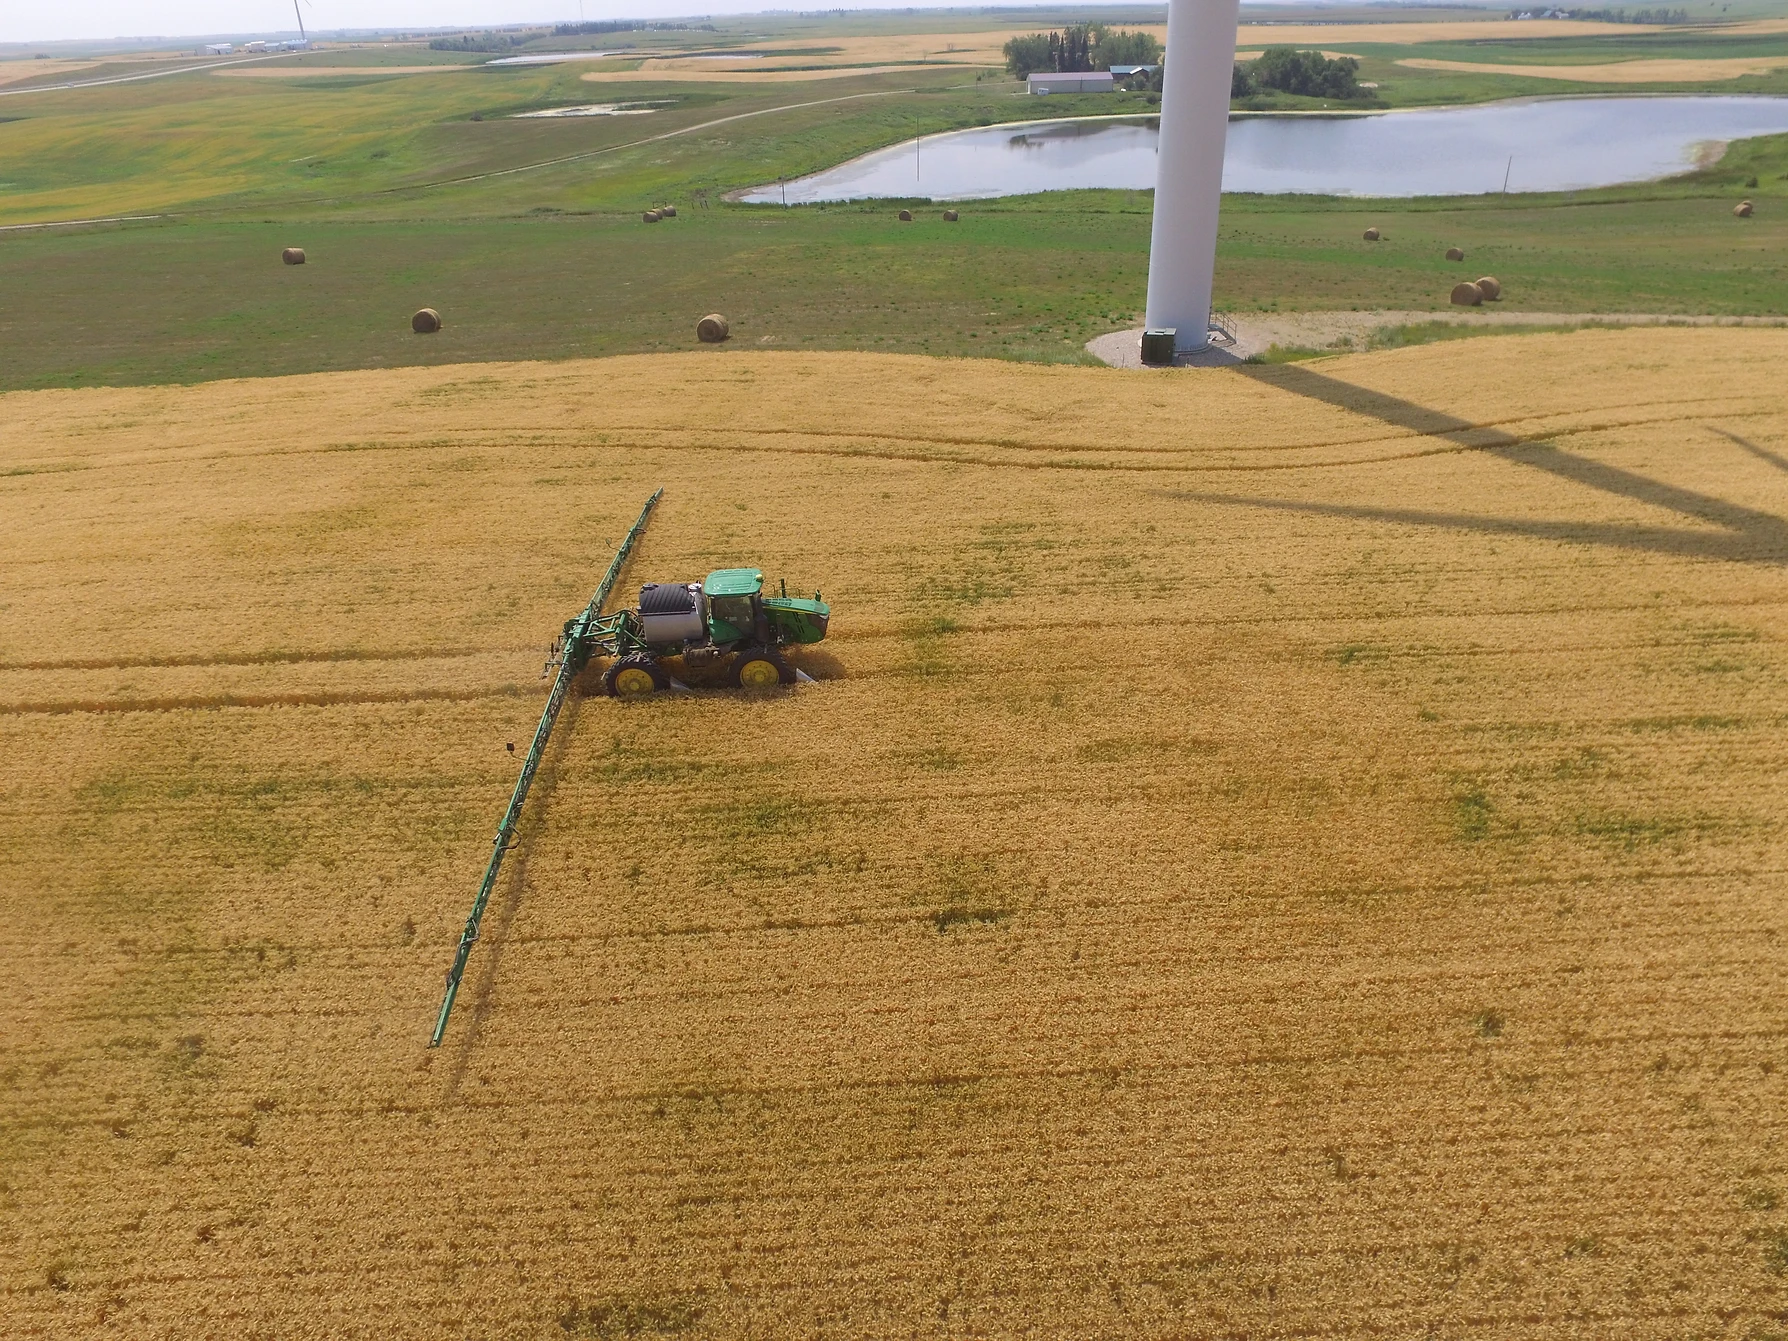 A large combine type tractor spraying a field